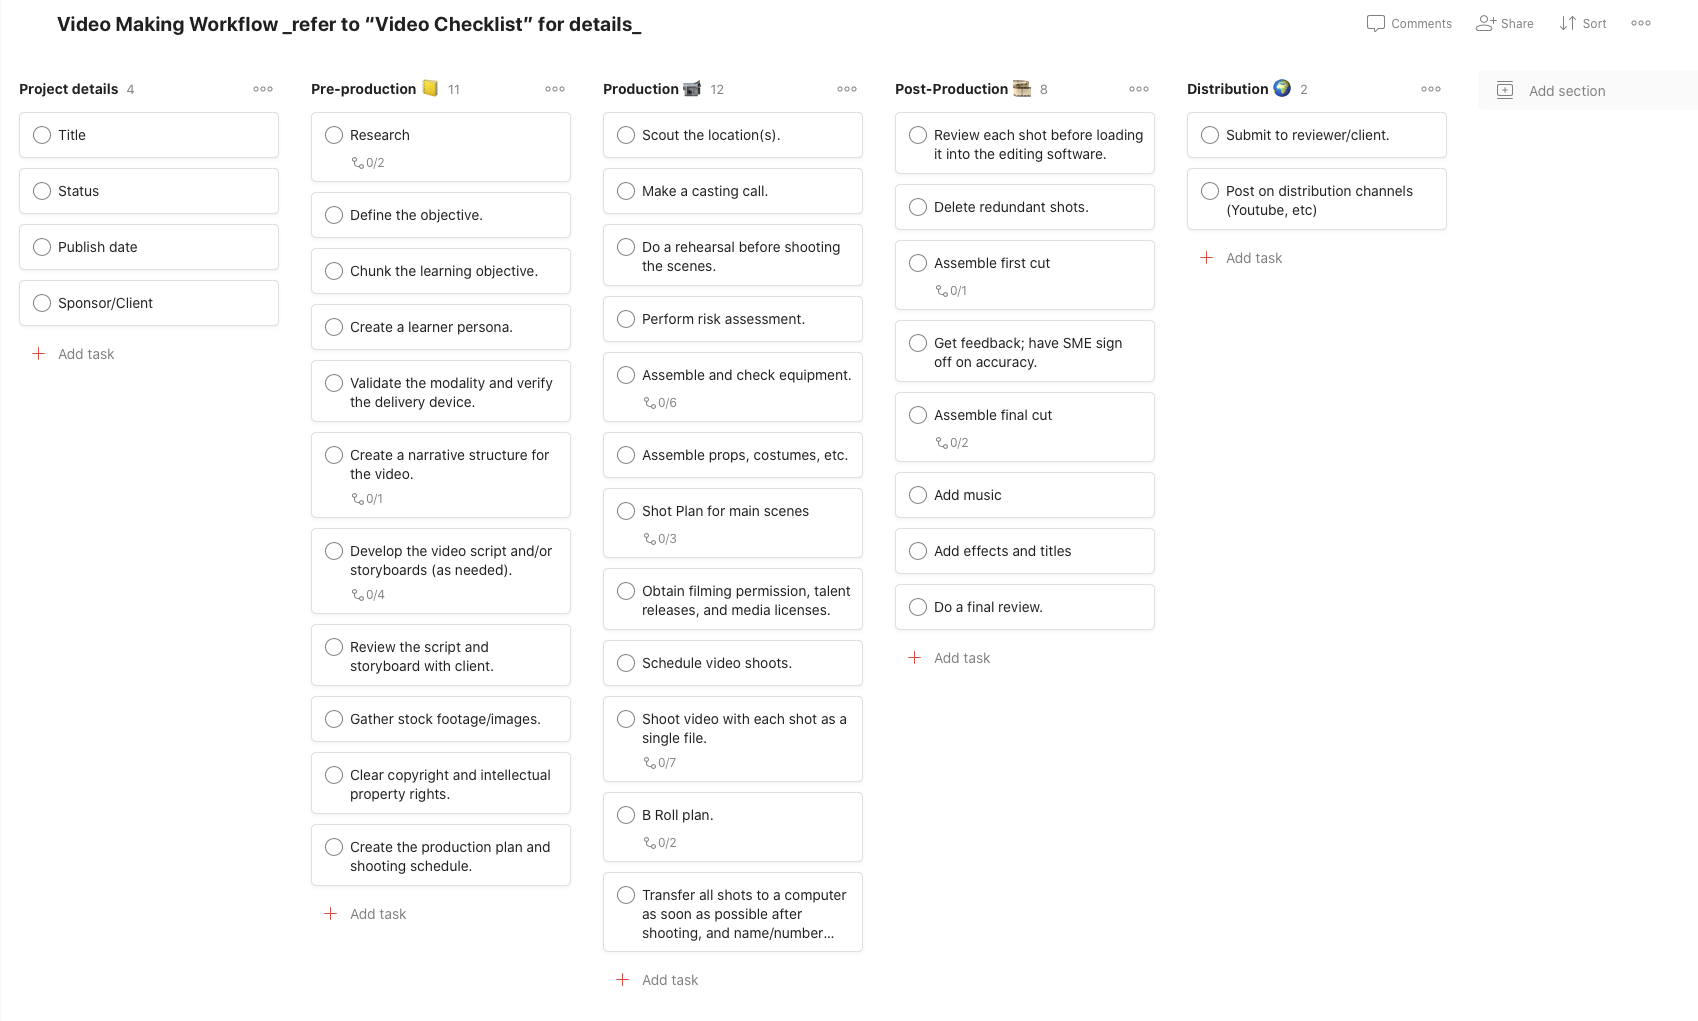 The Board view of tasks in Todoist is more compact, but the subtasks are not visible in the top-level view